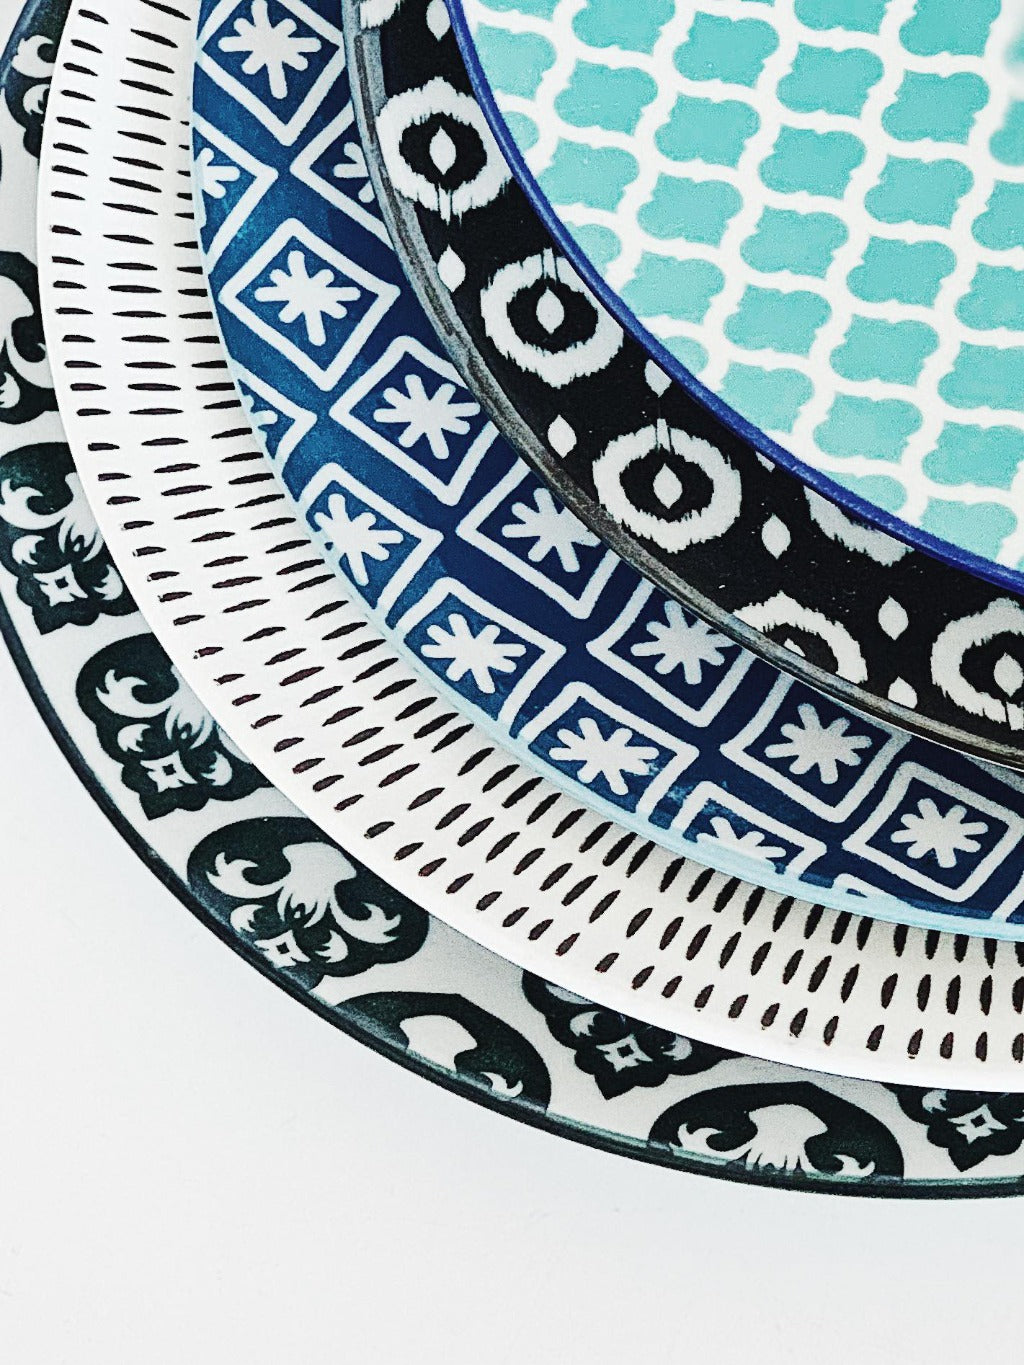 Moroccan Style Dinner Plate Large – perfect for serving dinner or large meals - Moroccan Style Dinnerware - Mix &amp; Match - 27cmW x 2cmH - wide range of colours and patterns - Commercial Grade quality - Patterns Picked at random |Bliss Gifts &amp; Homewares - Unit 8, 259 Princes Hwy Ulladulla - Shop Online - 0427795959, 44541523 - Australia wide shipping – AfterPay Available 